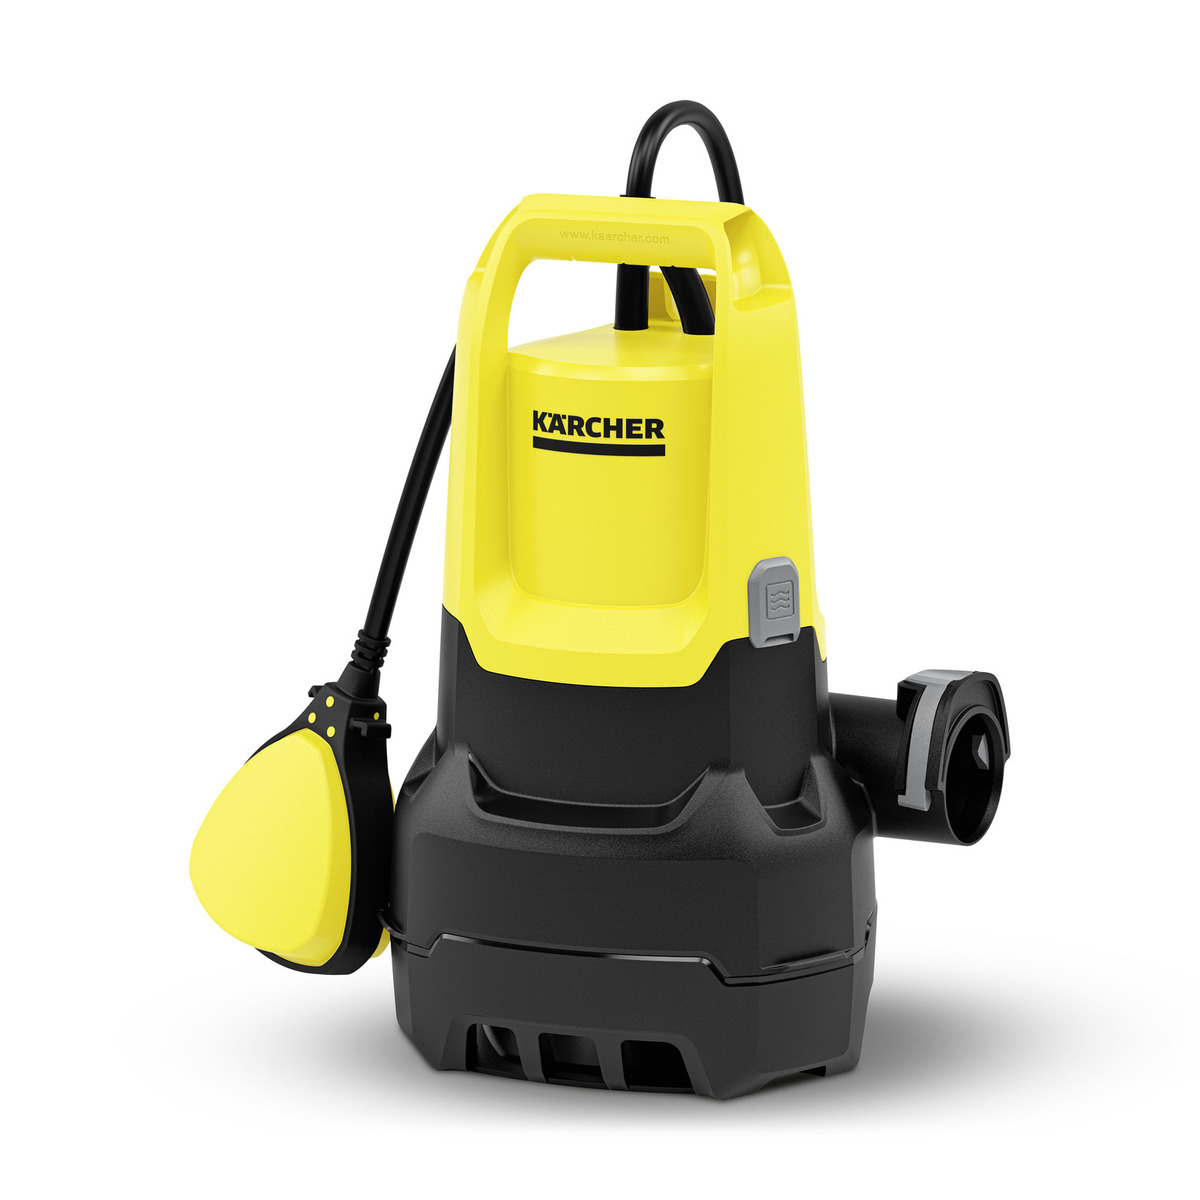 A yellow and black Karcher water pump with a handle on top for easy portability. The pump has a large outlet on the side and a float switch attached by a cord. The design is compact and durable, suitable for various water removal tasks.